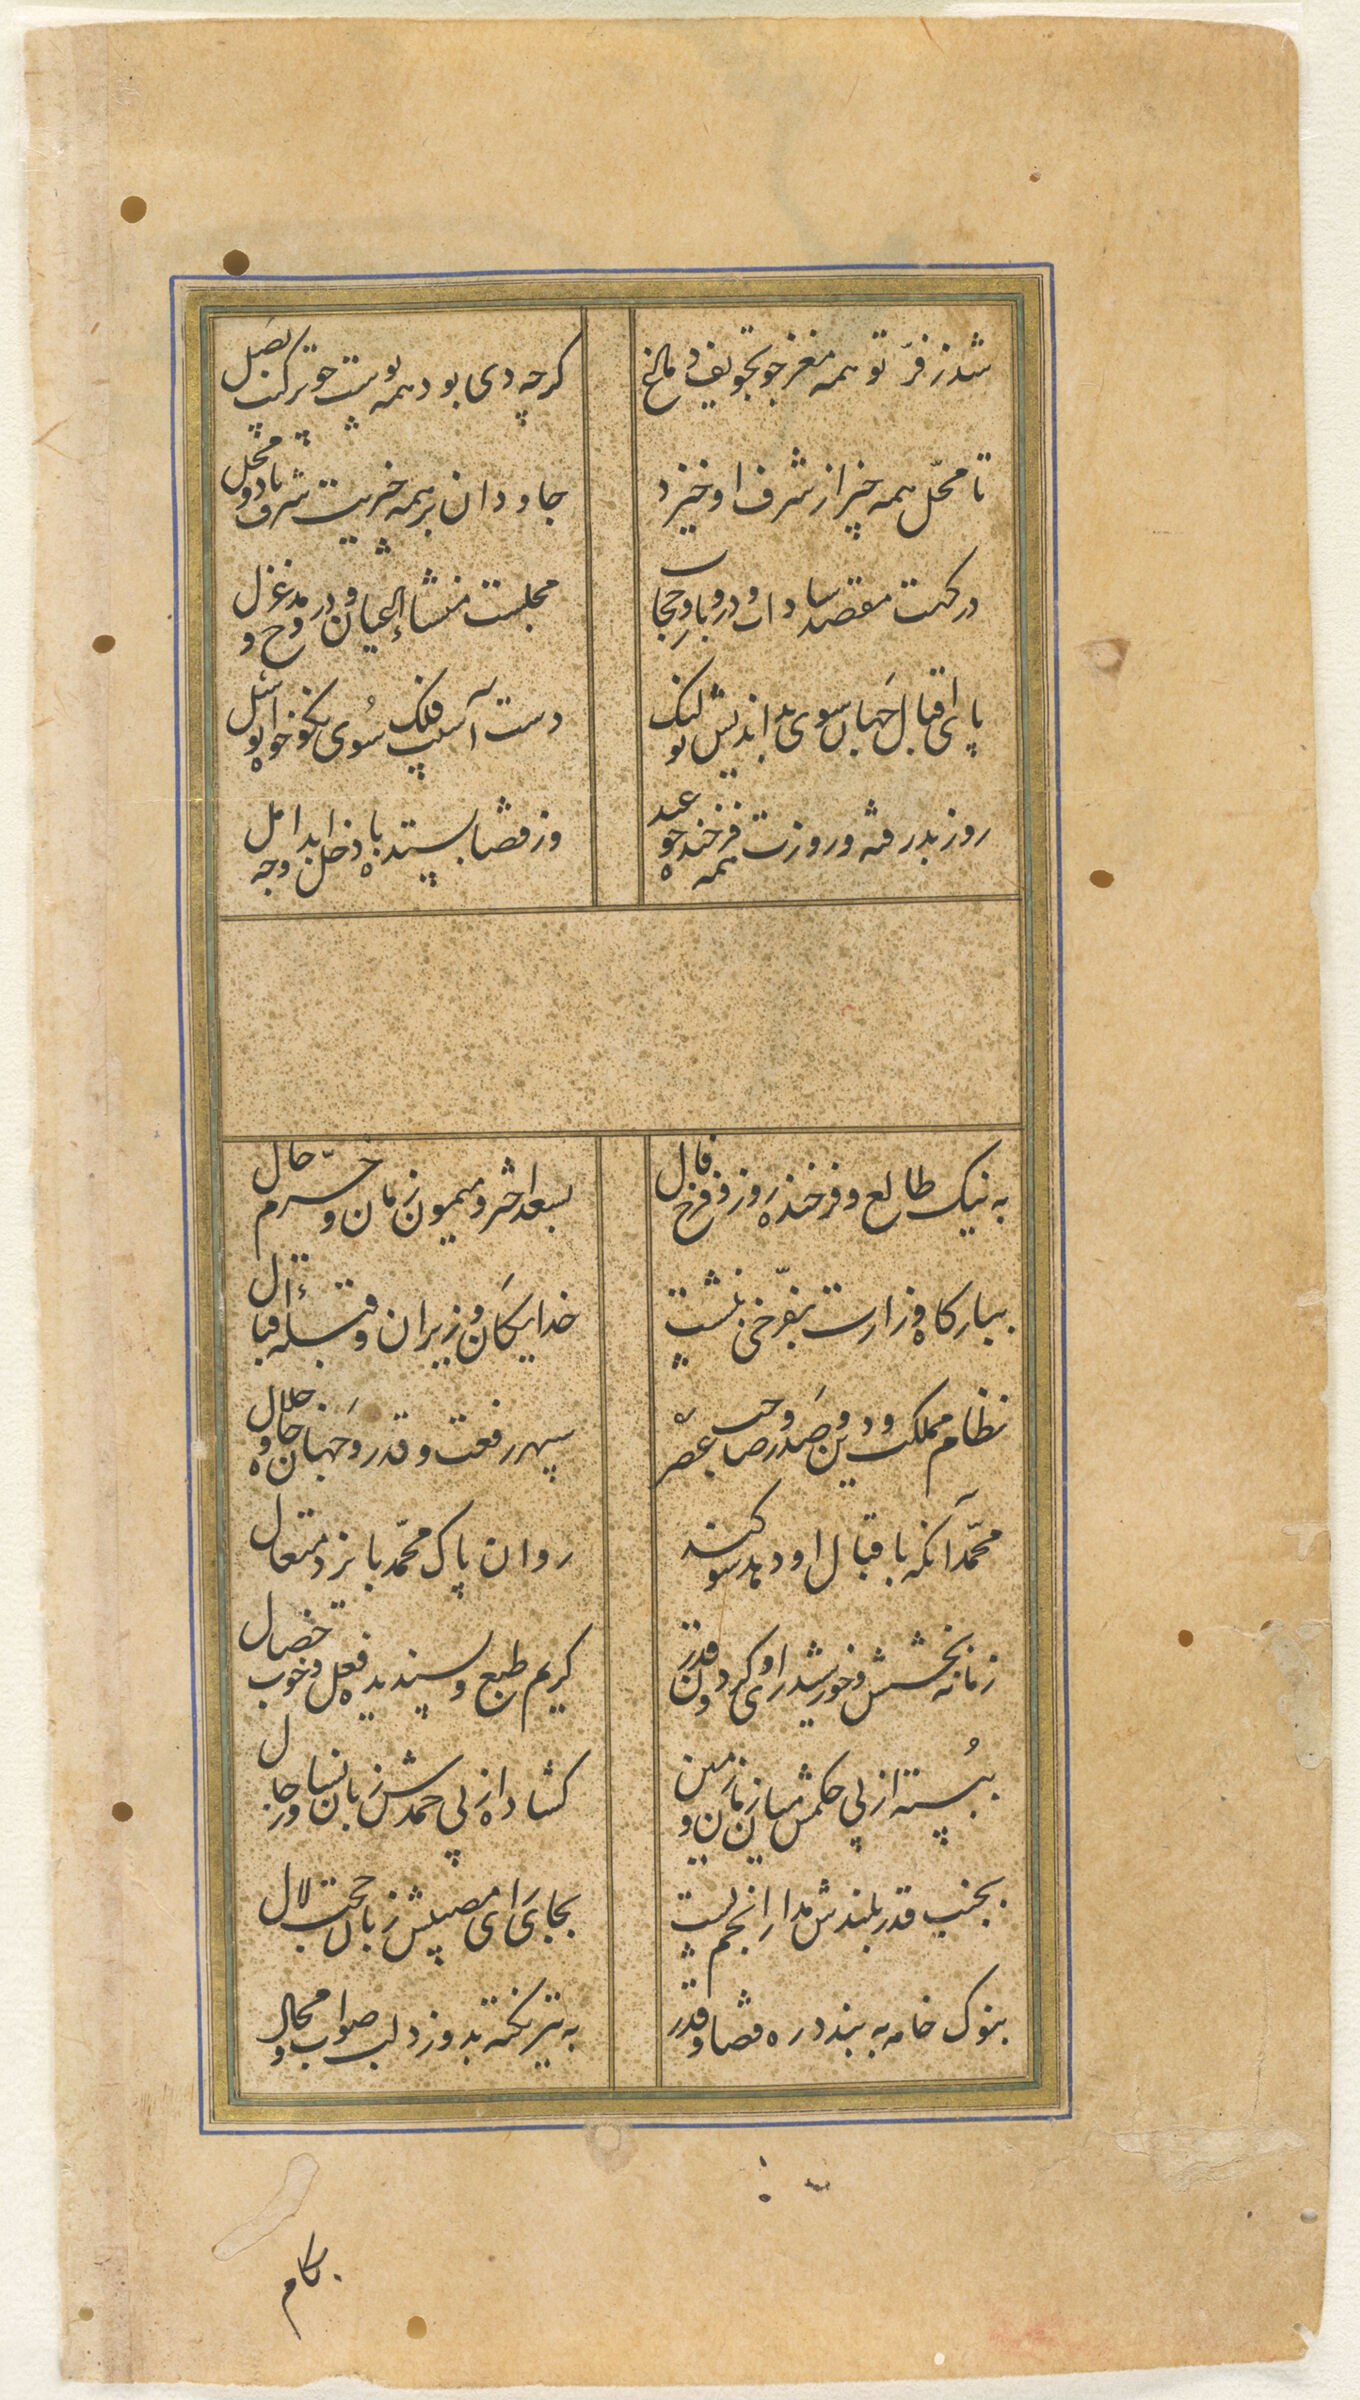 Folio 127 (Text, Recto And Verso), From A Manuscript Of The Divan (Collection Of Works)  Of Anvari